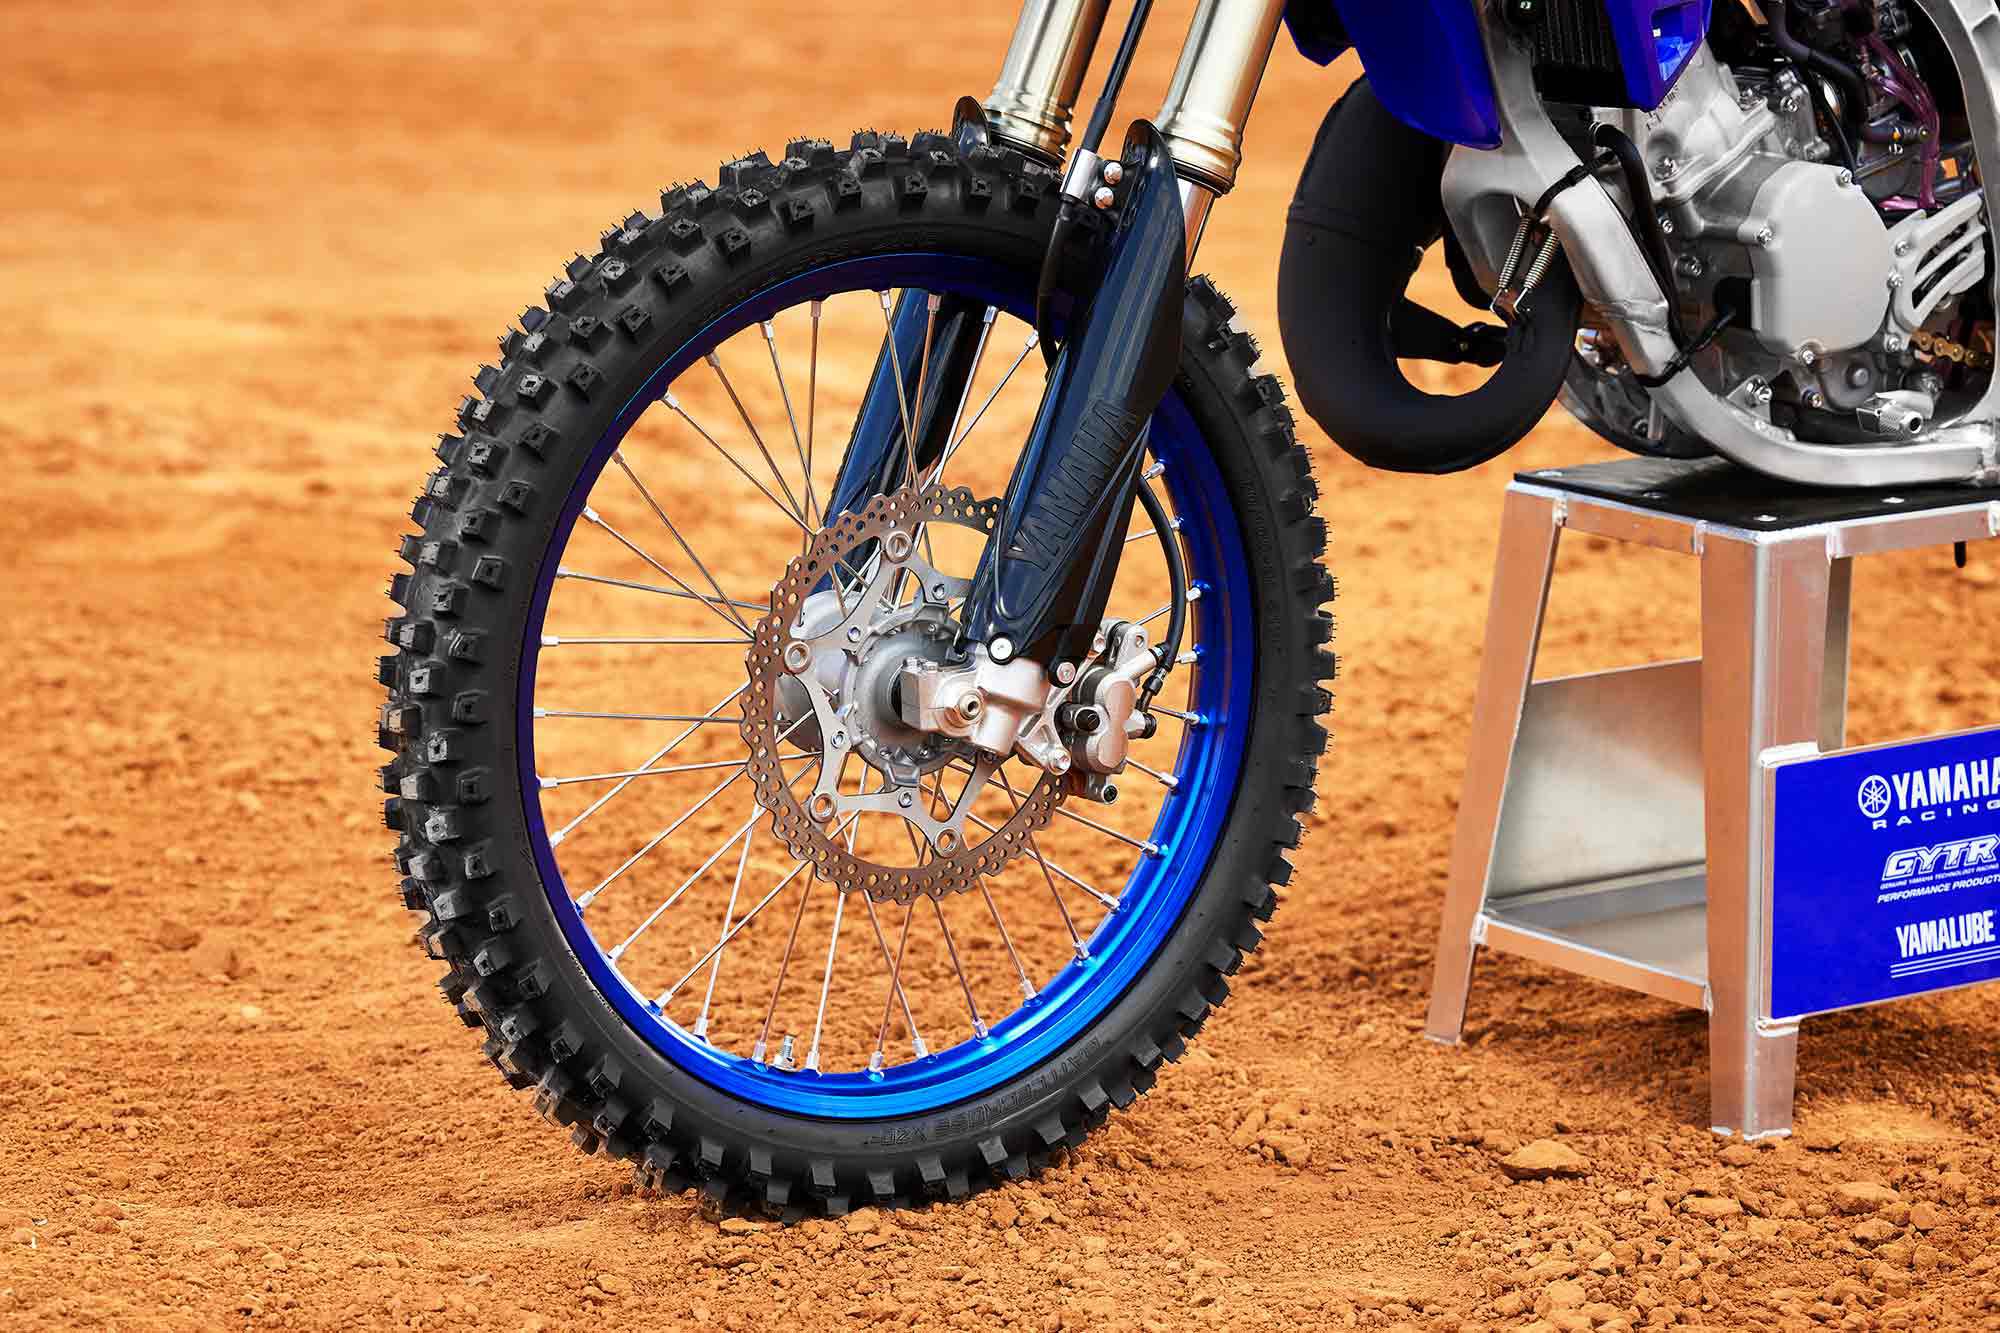 The KYB fork features a new leaf spring in the mid-valve.